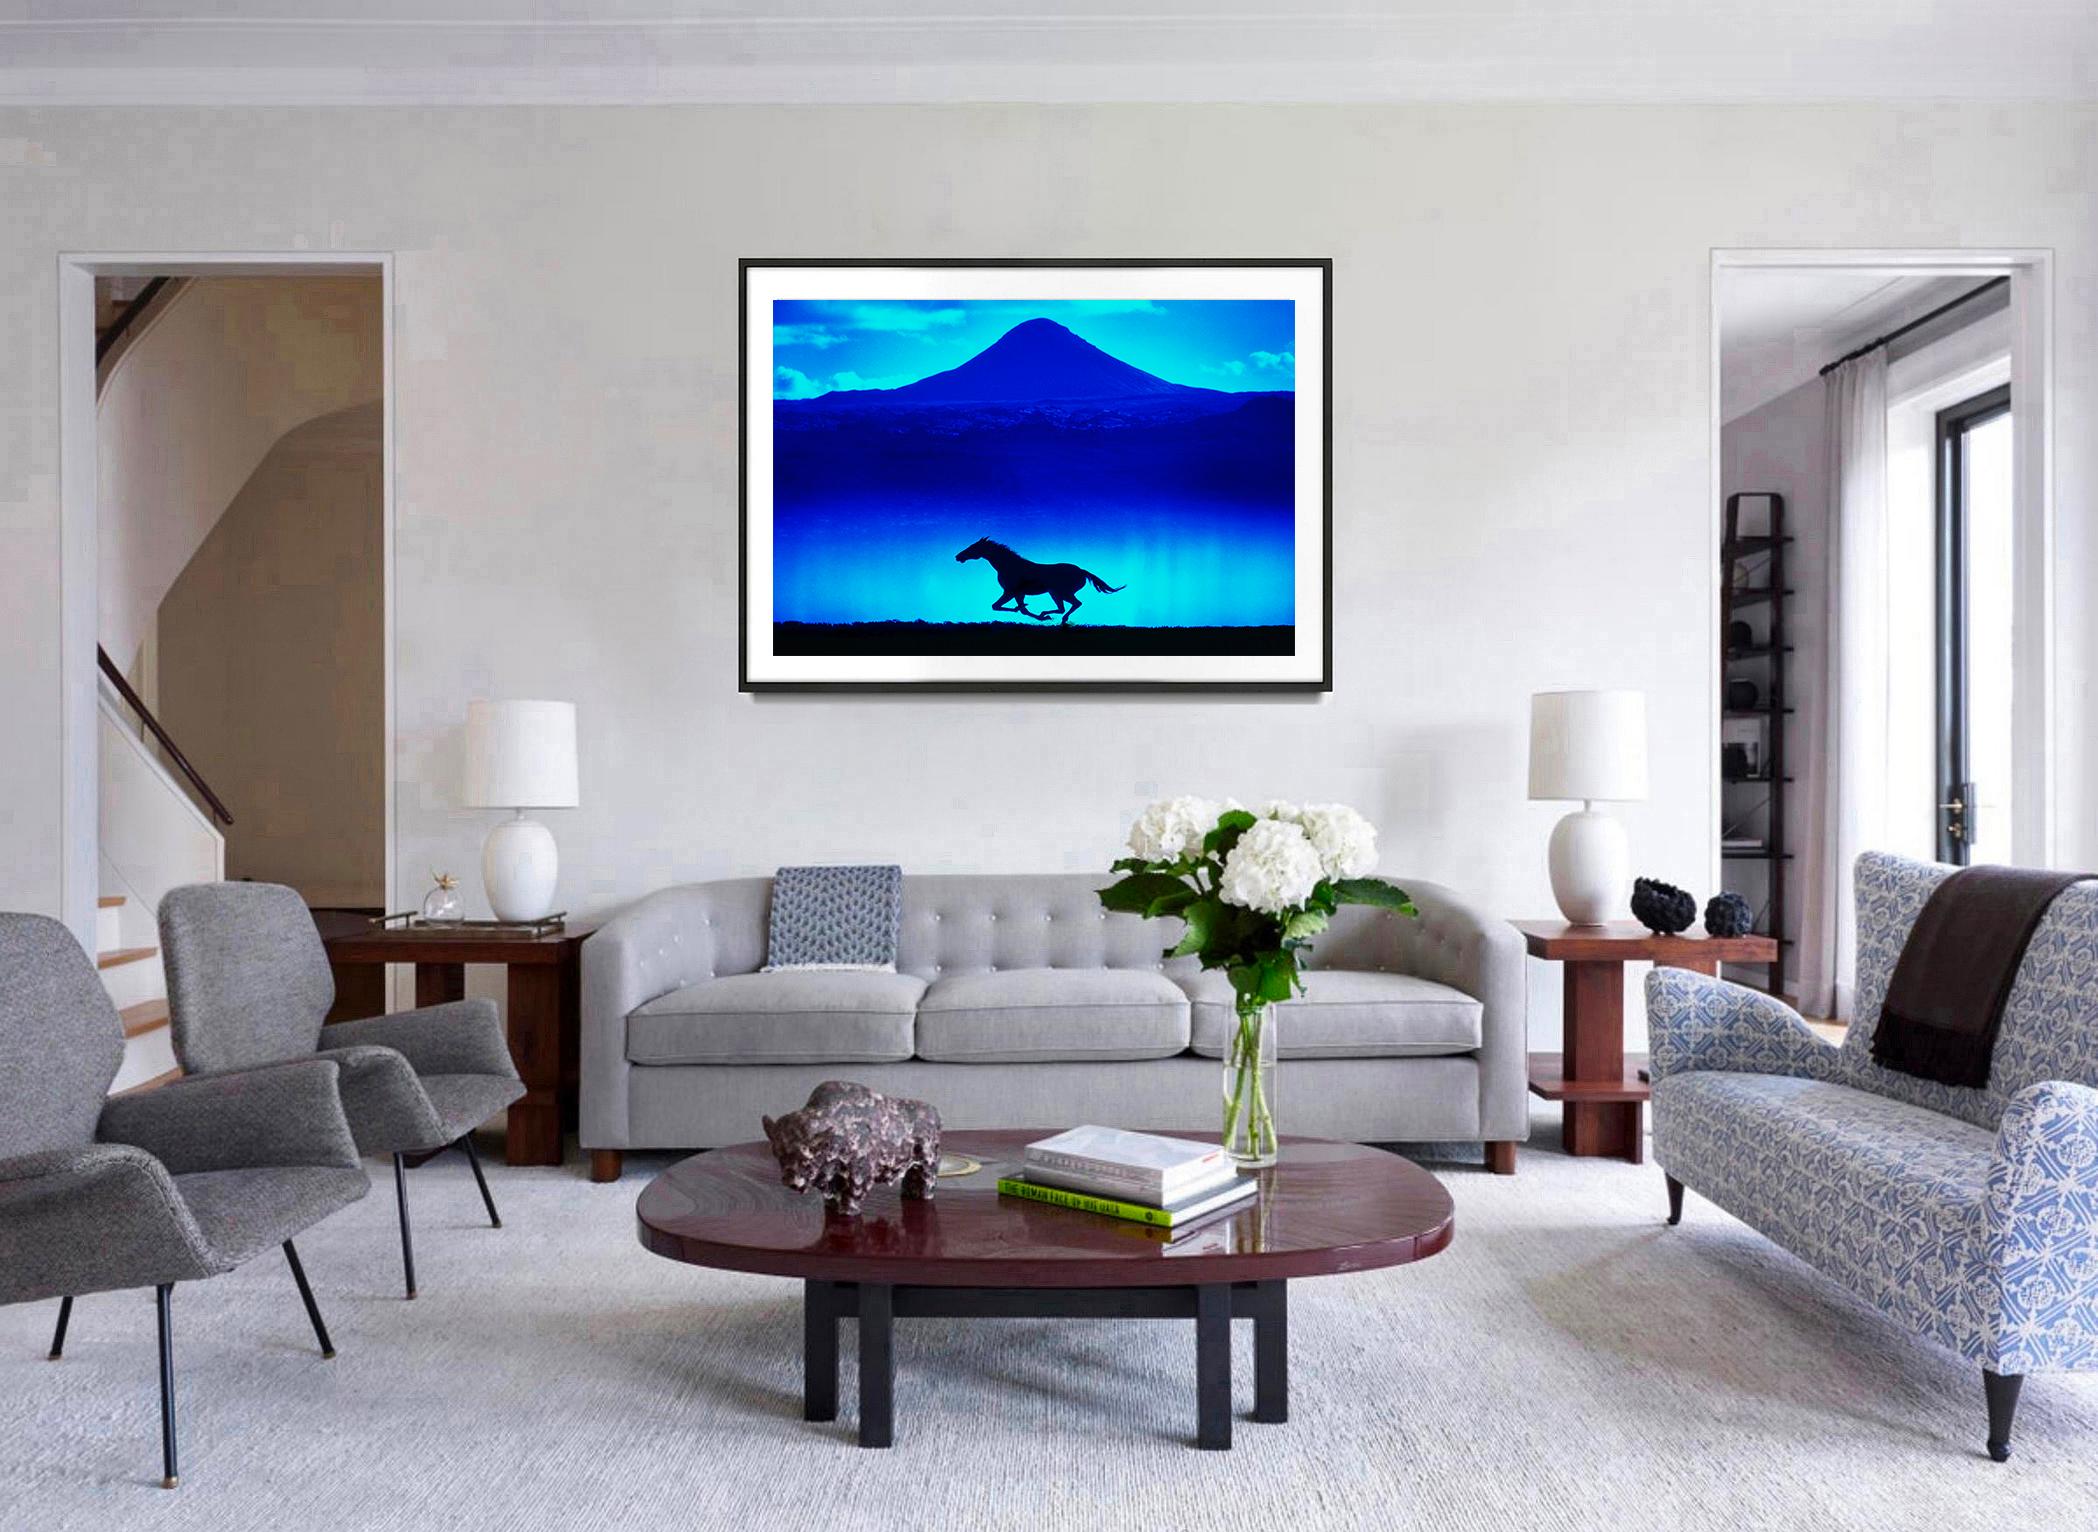 Solitary Running Horse Silhouetted against Blue Mountain - Modern Photograph by Mitchell Funk